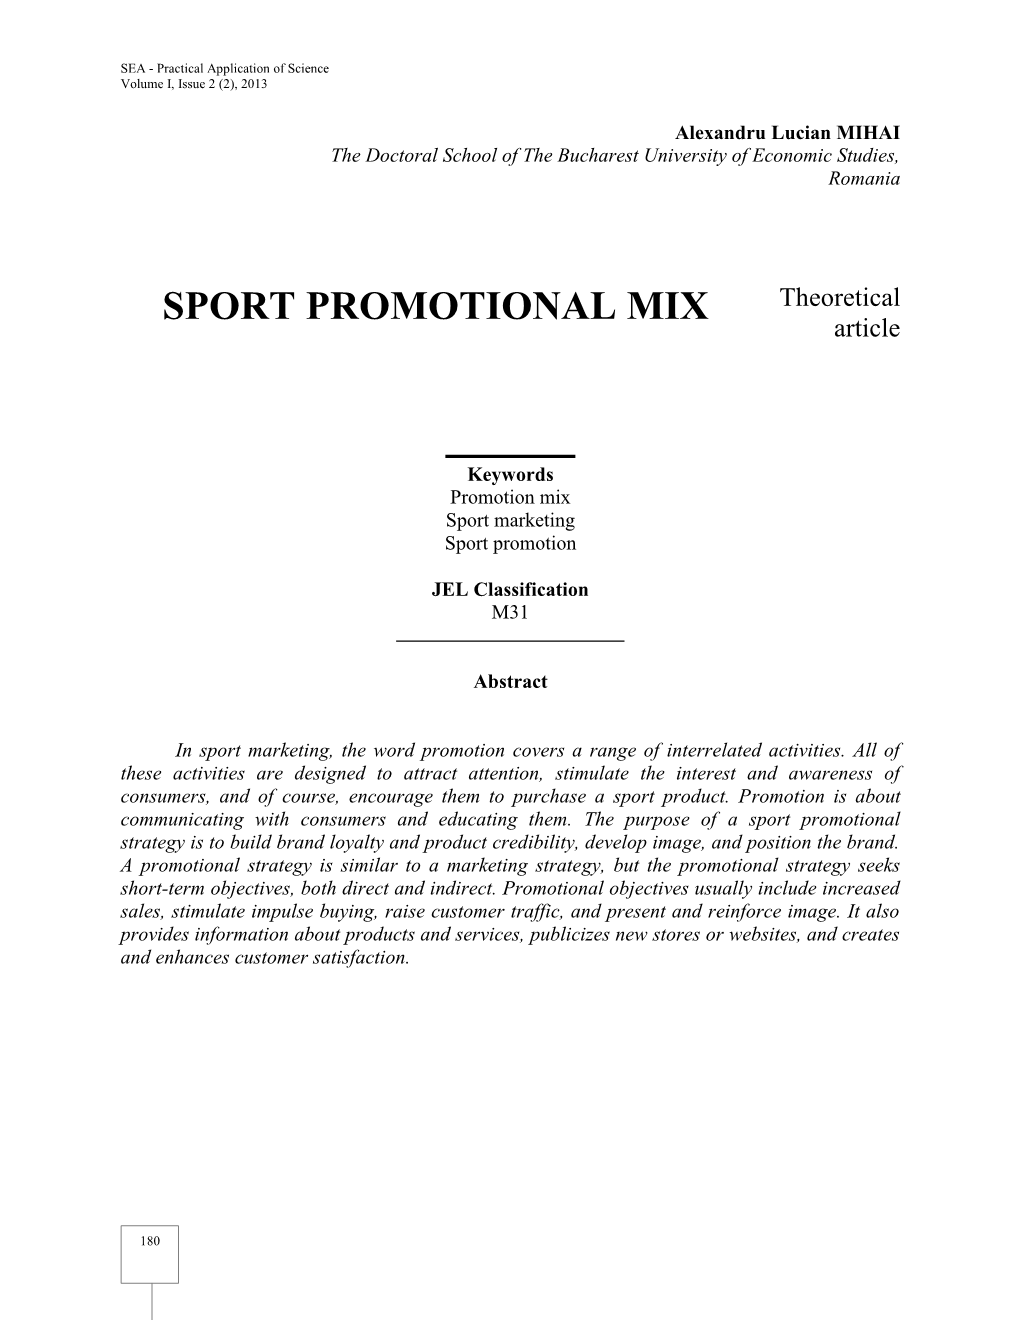 SPORT PROMOTIONAL MIX Theoretical Article